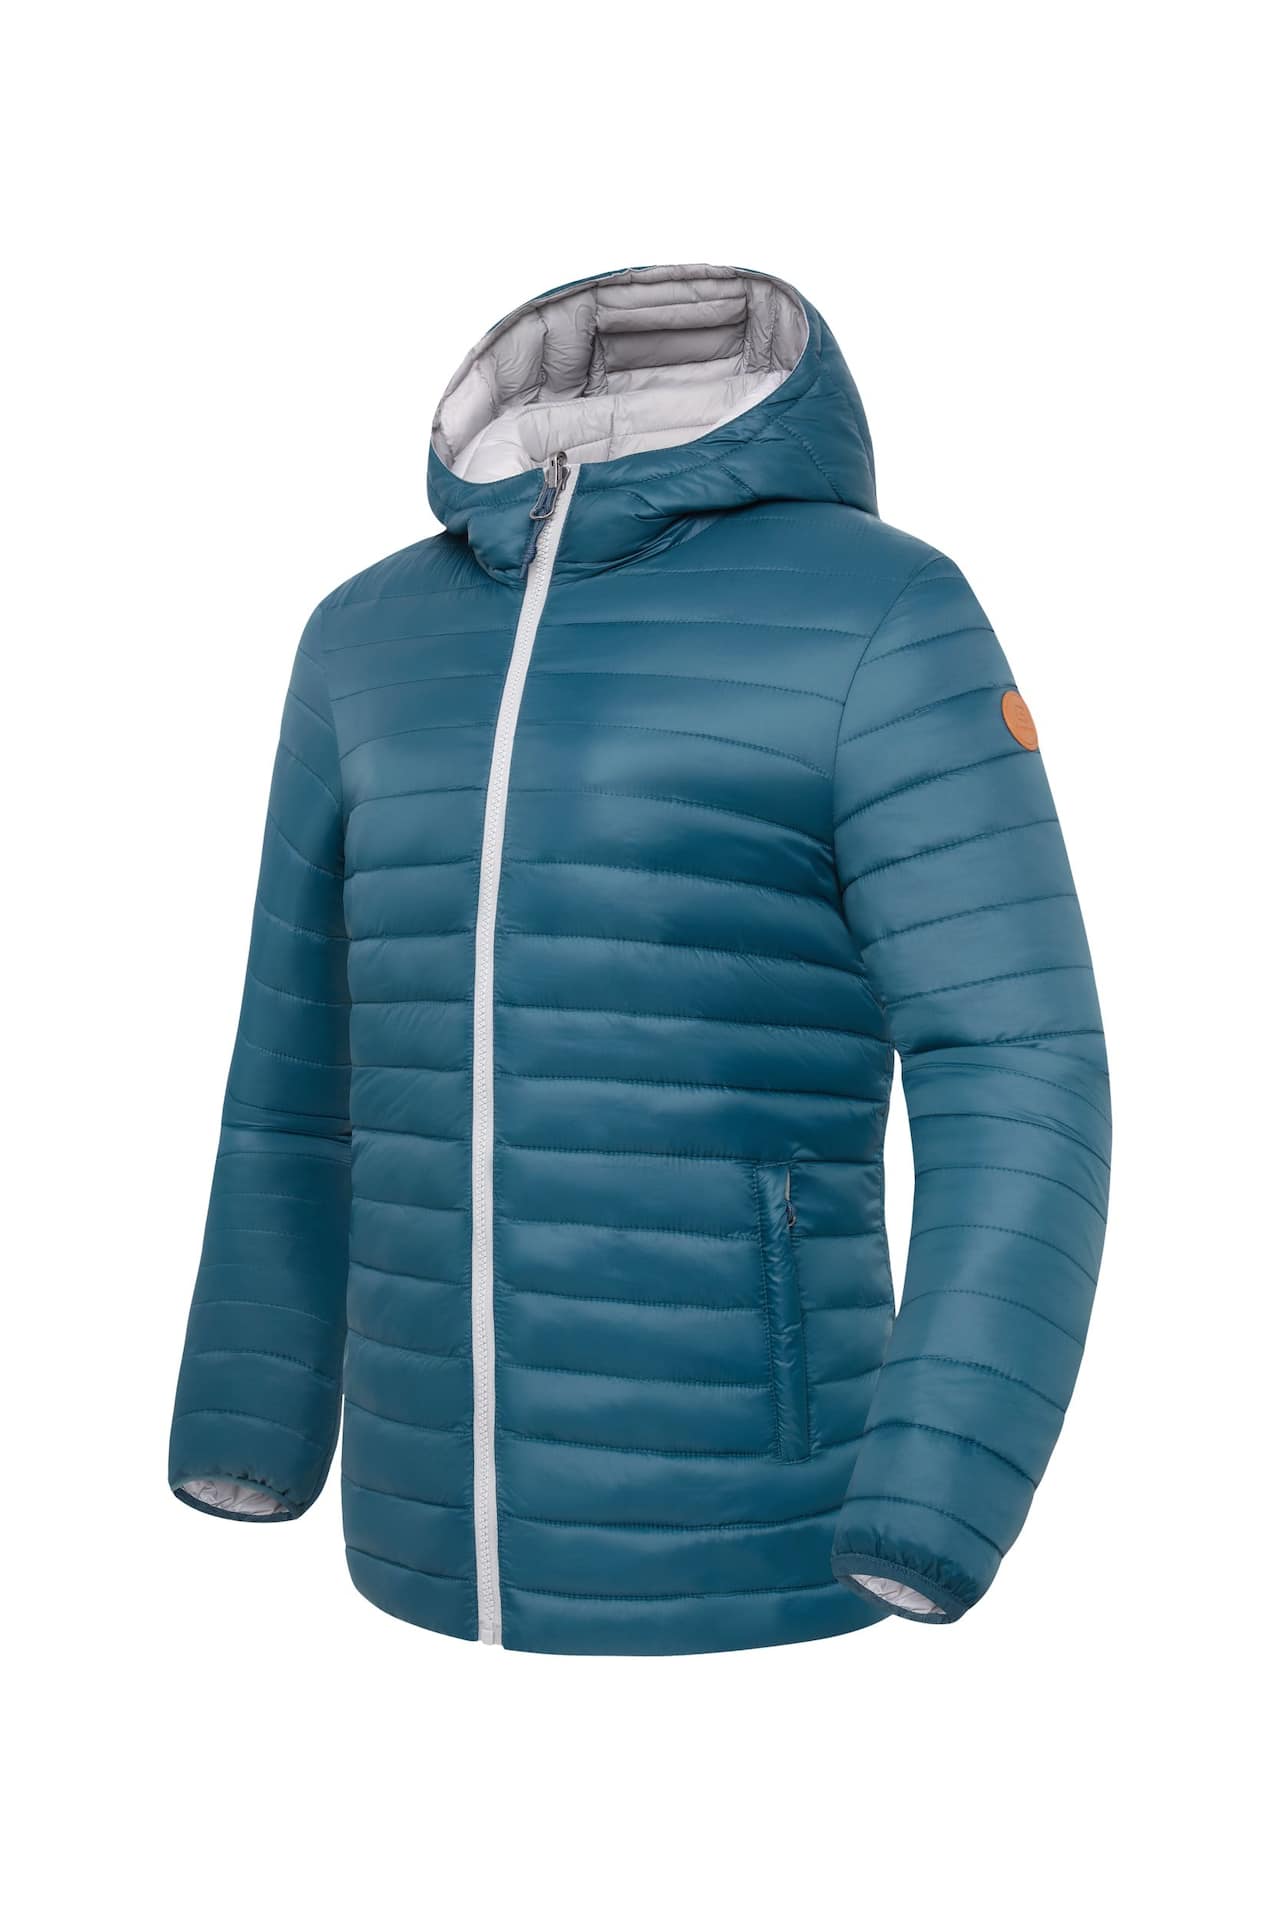 Outbound Women's Stratus Reversible Puffy Jacket, Blue/Grey